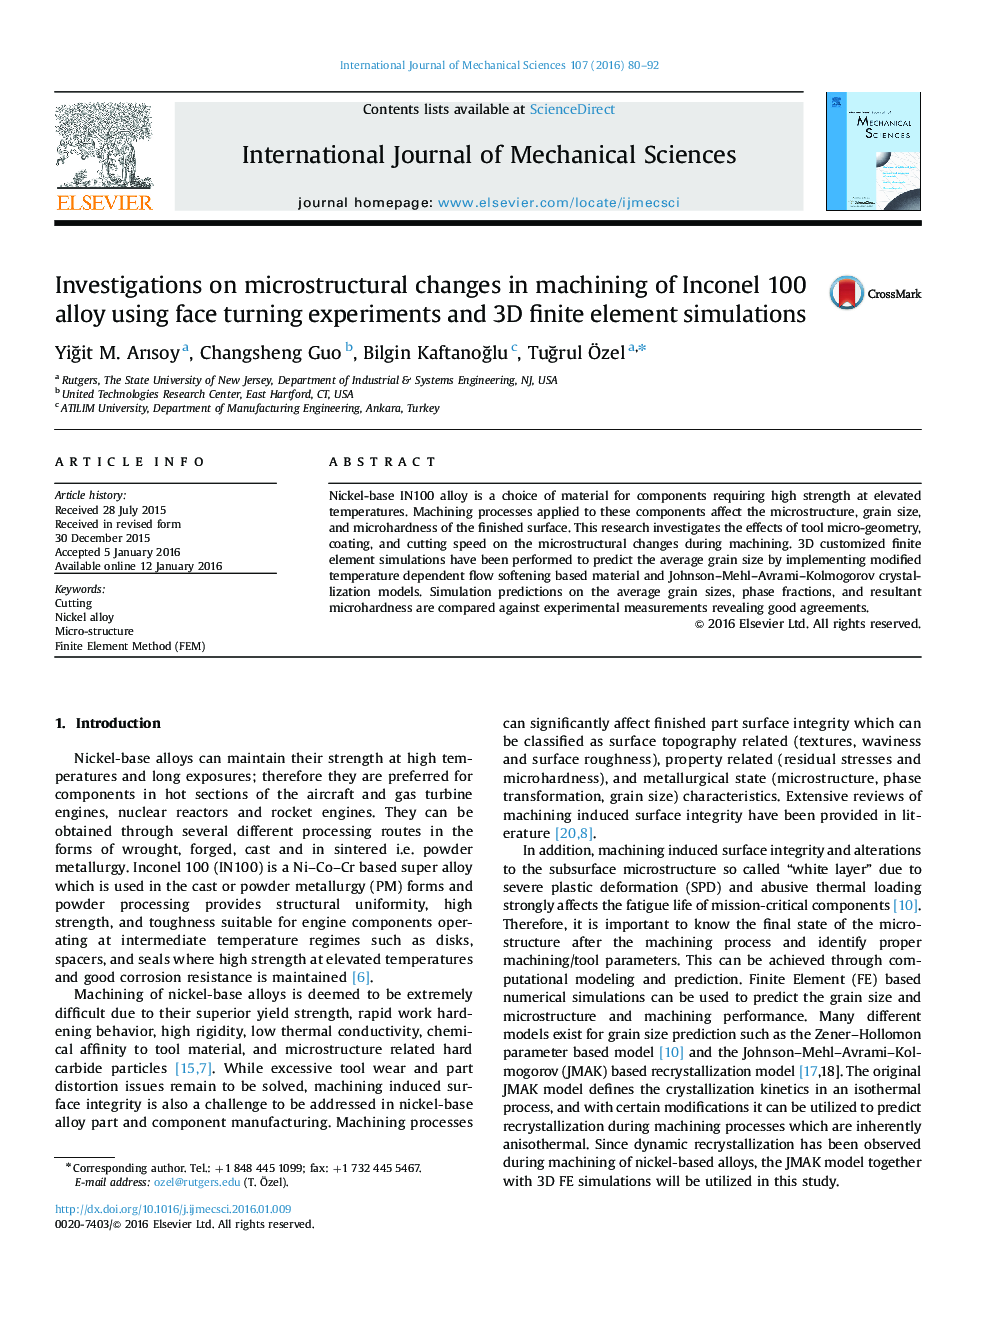 Investigations on microstructural changes in machining of Inconel 100 alloy using face turning experiments and 3D finite element simulations